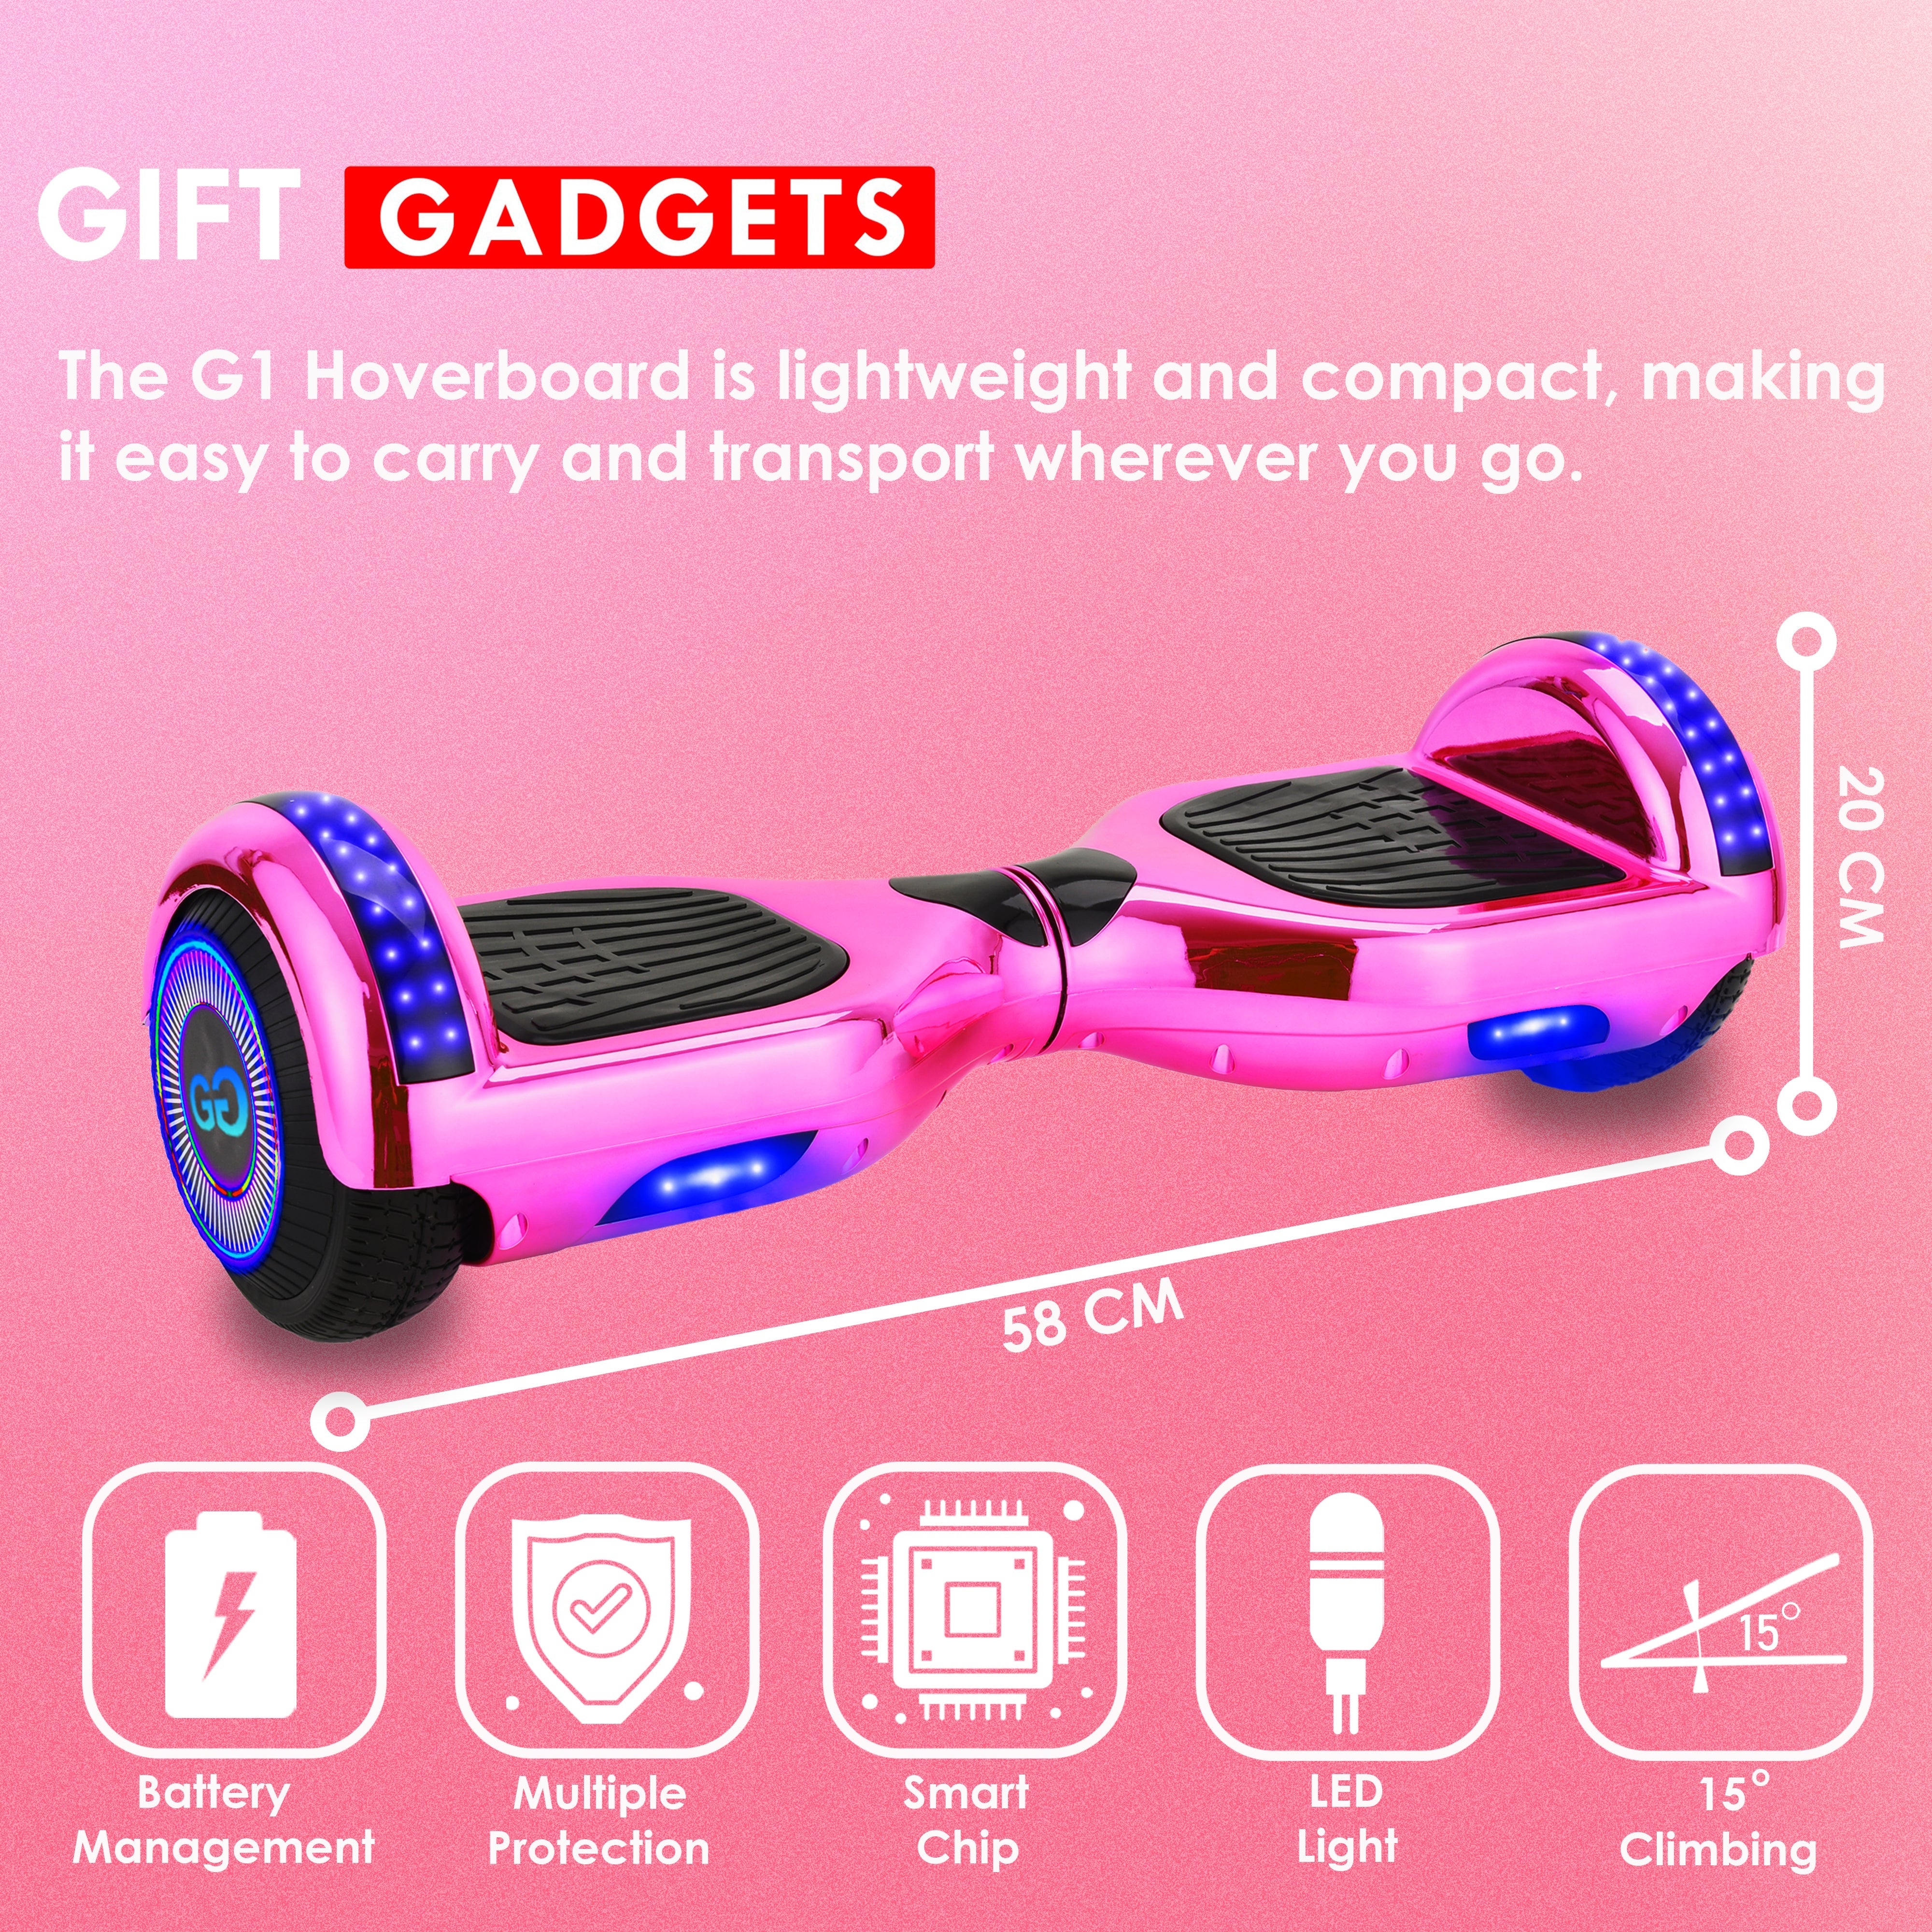 Pink G1 hoverboard with LED lights and black footpads, showcasing battery management, multiple protection, and smart chip features.